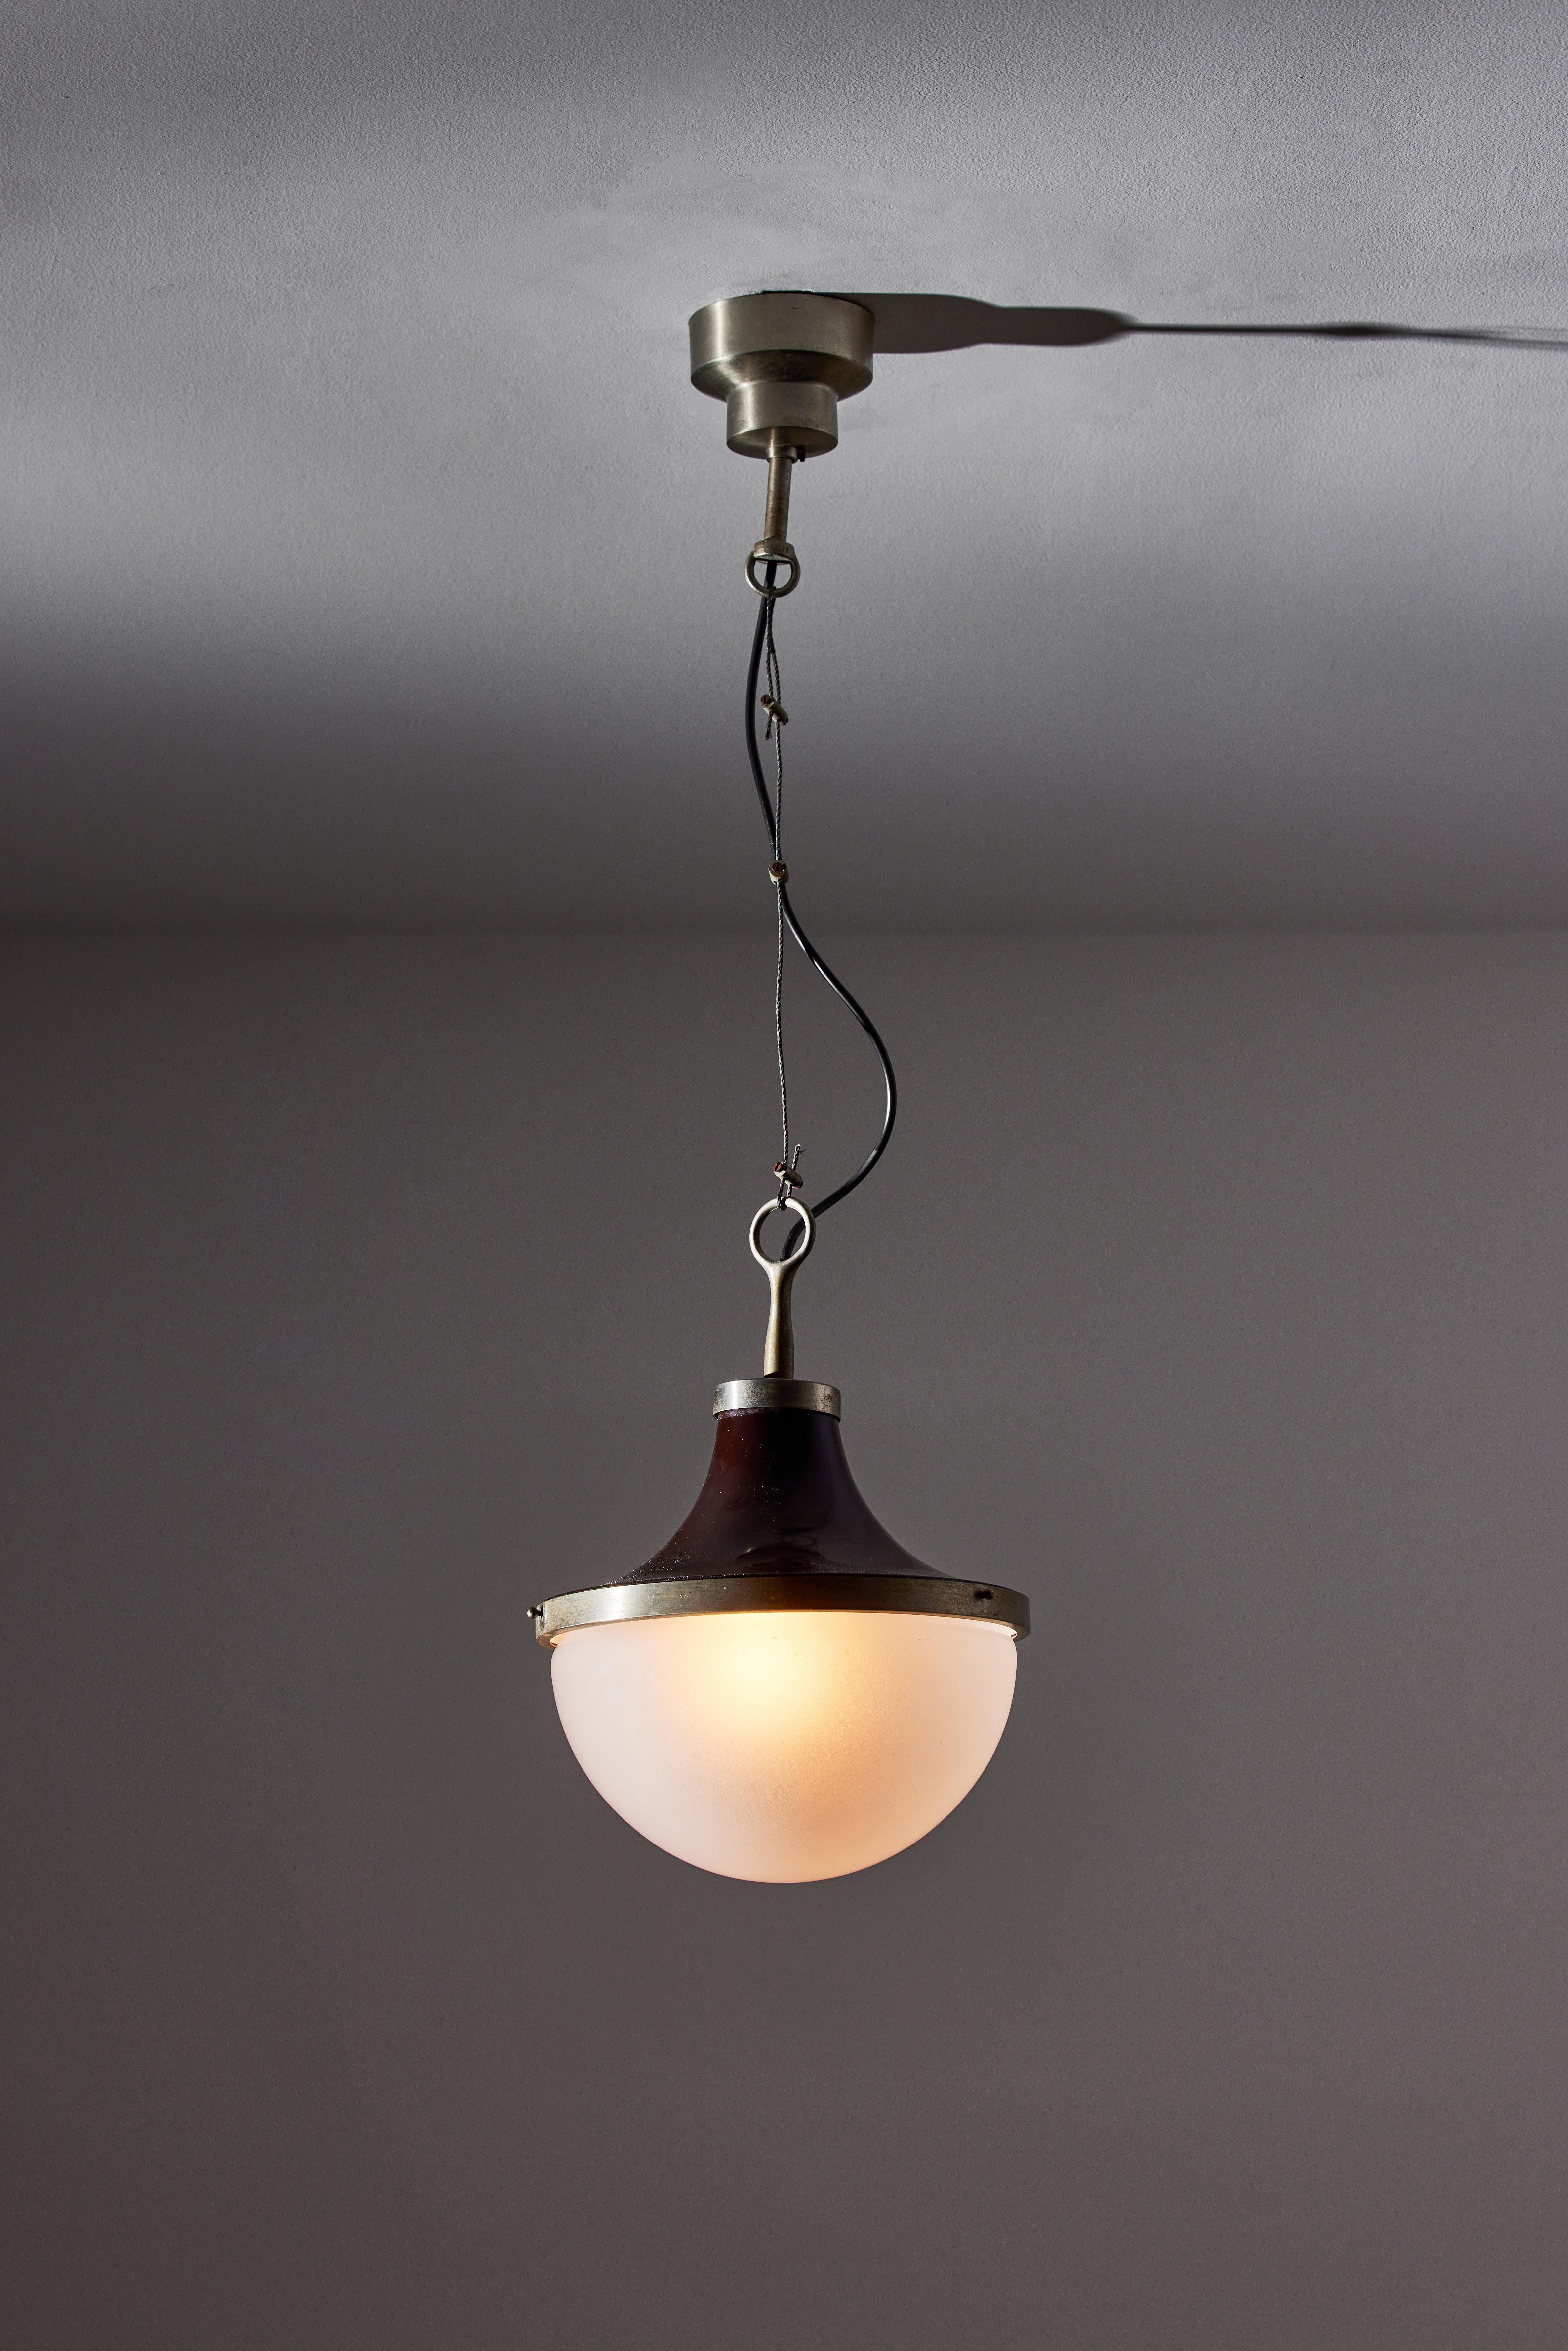 Picaro suspension light by Sergio Mazza for Artemide. Designed and manufactured in Italy, circa 1960s. Glass, brushed nickel, painted metal, brass. Custom brushed nickel-plated ceiling plate. Wired for U.S. standards. We recommend one E27 75w